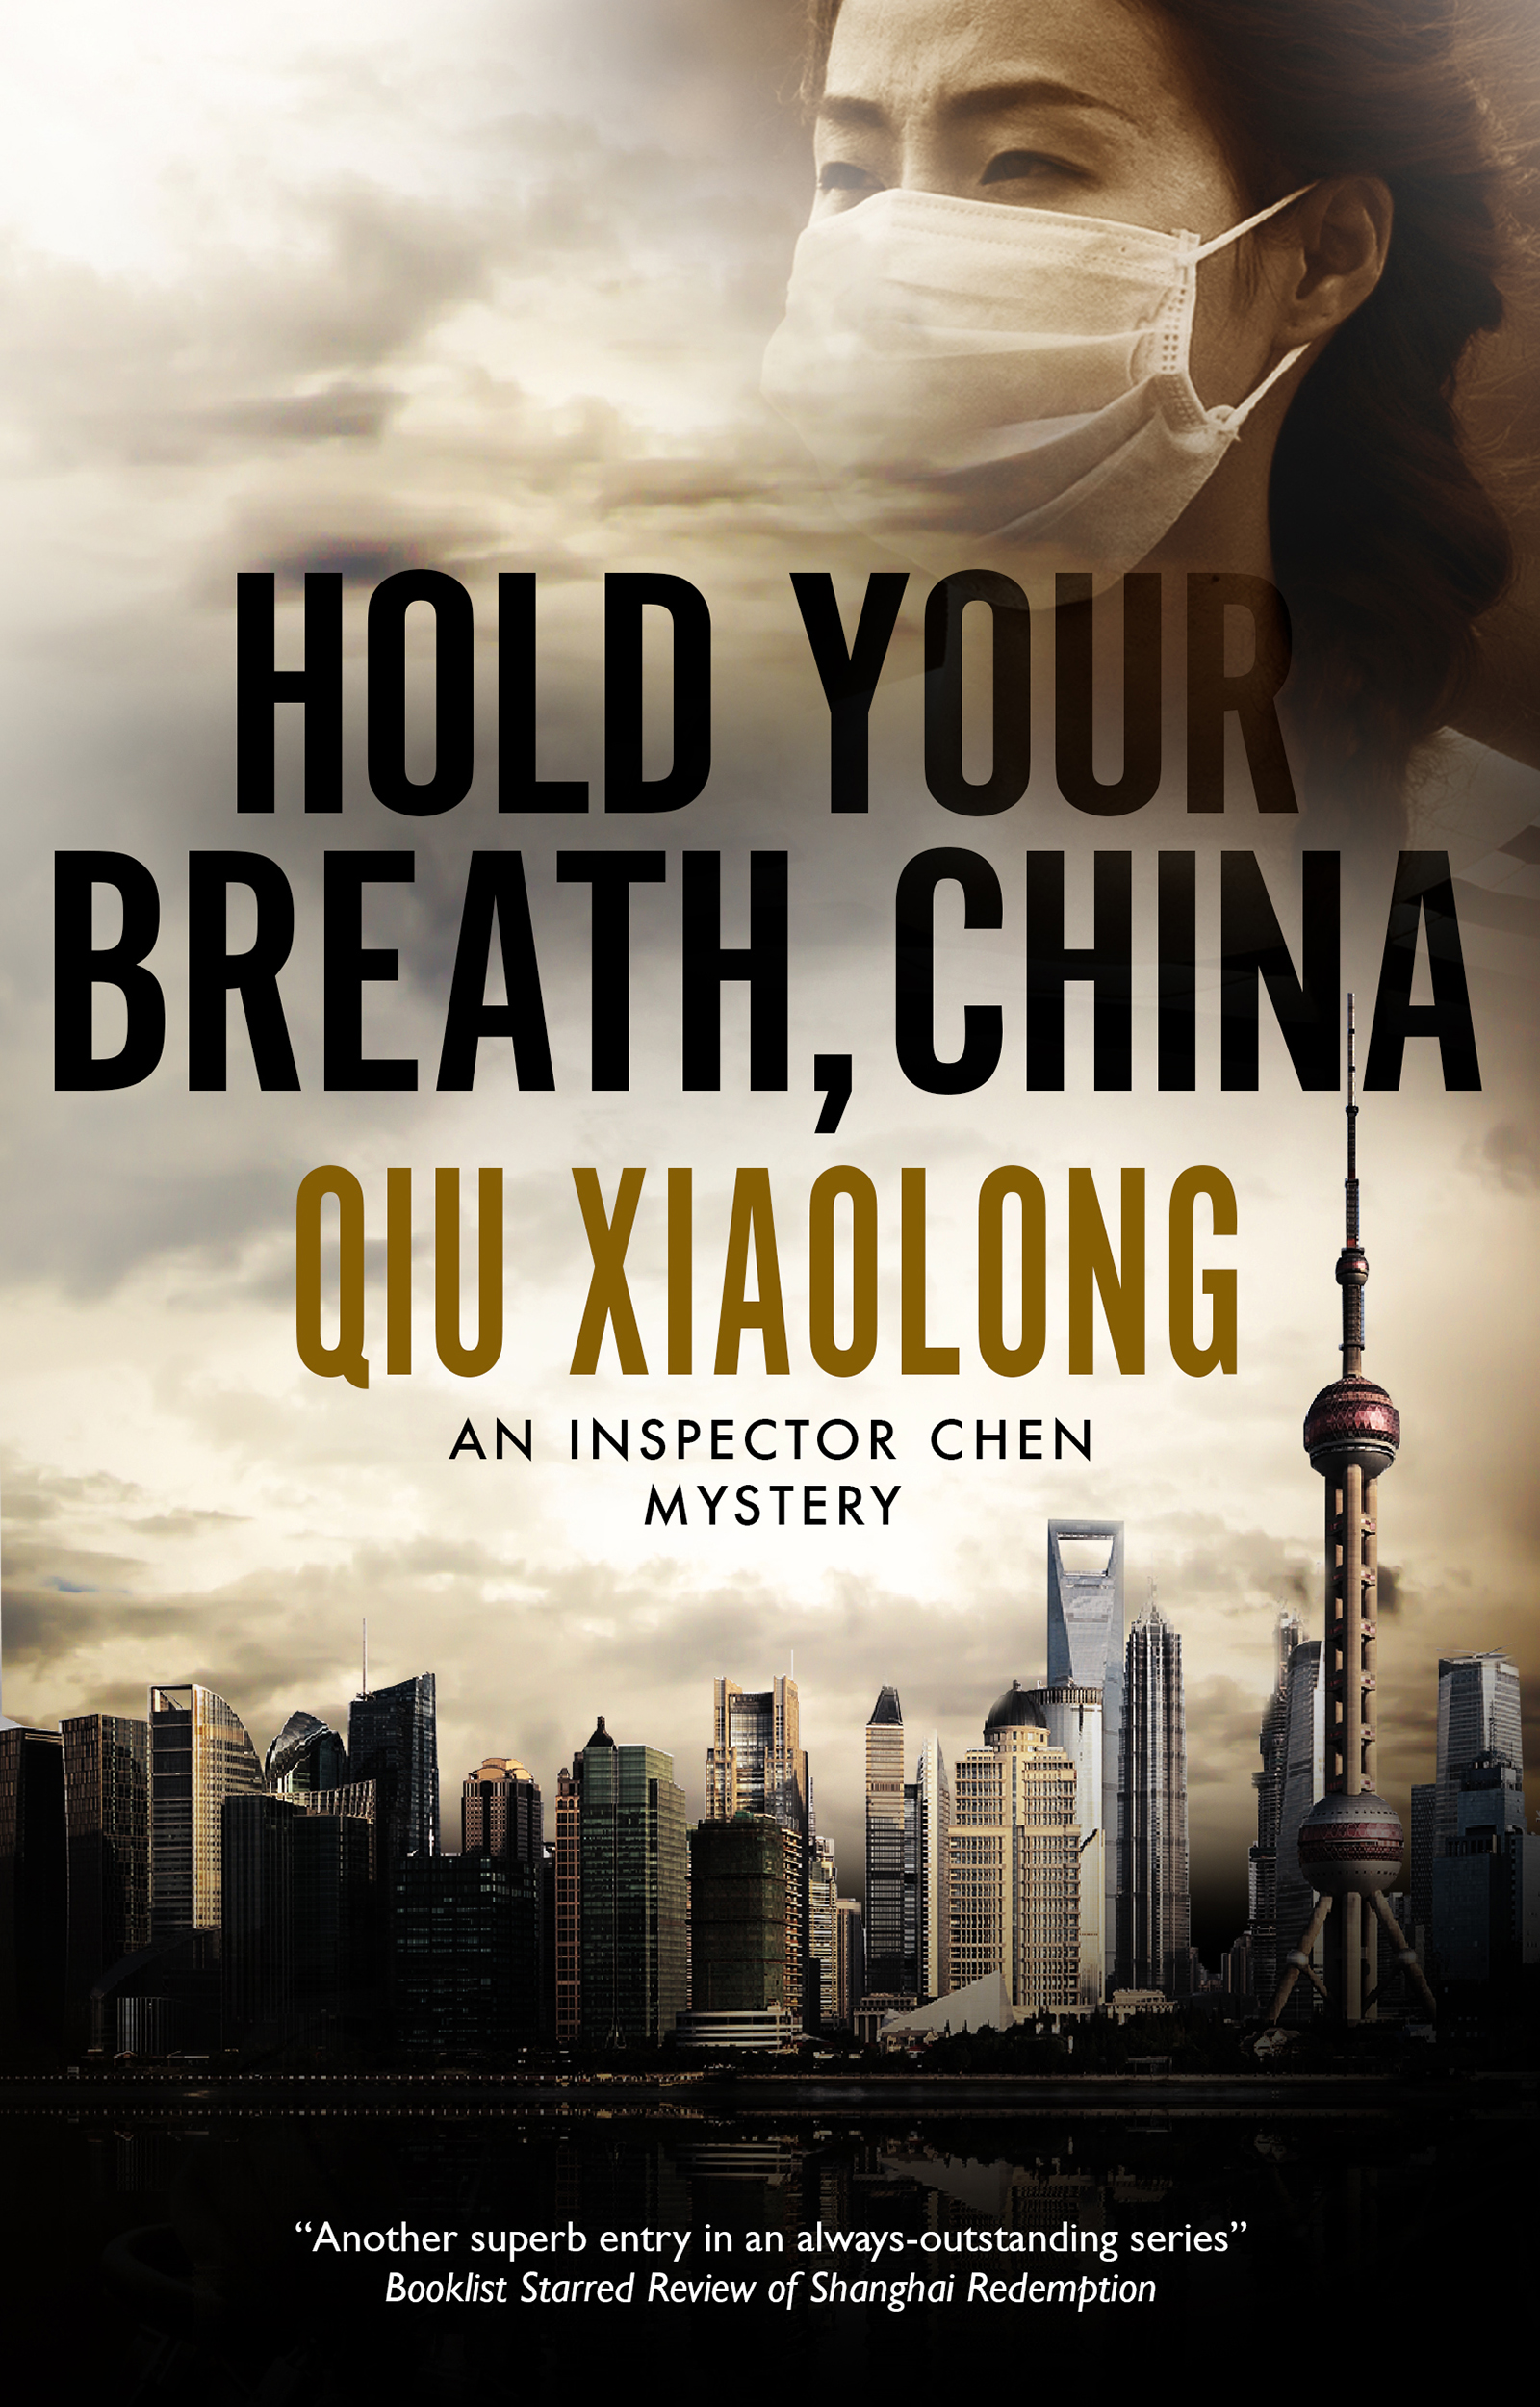 Murder, Smog, and Communist Intrigue in <i>Hold Your Breath, China</i>